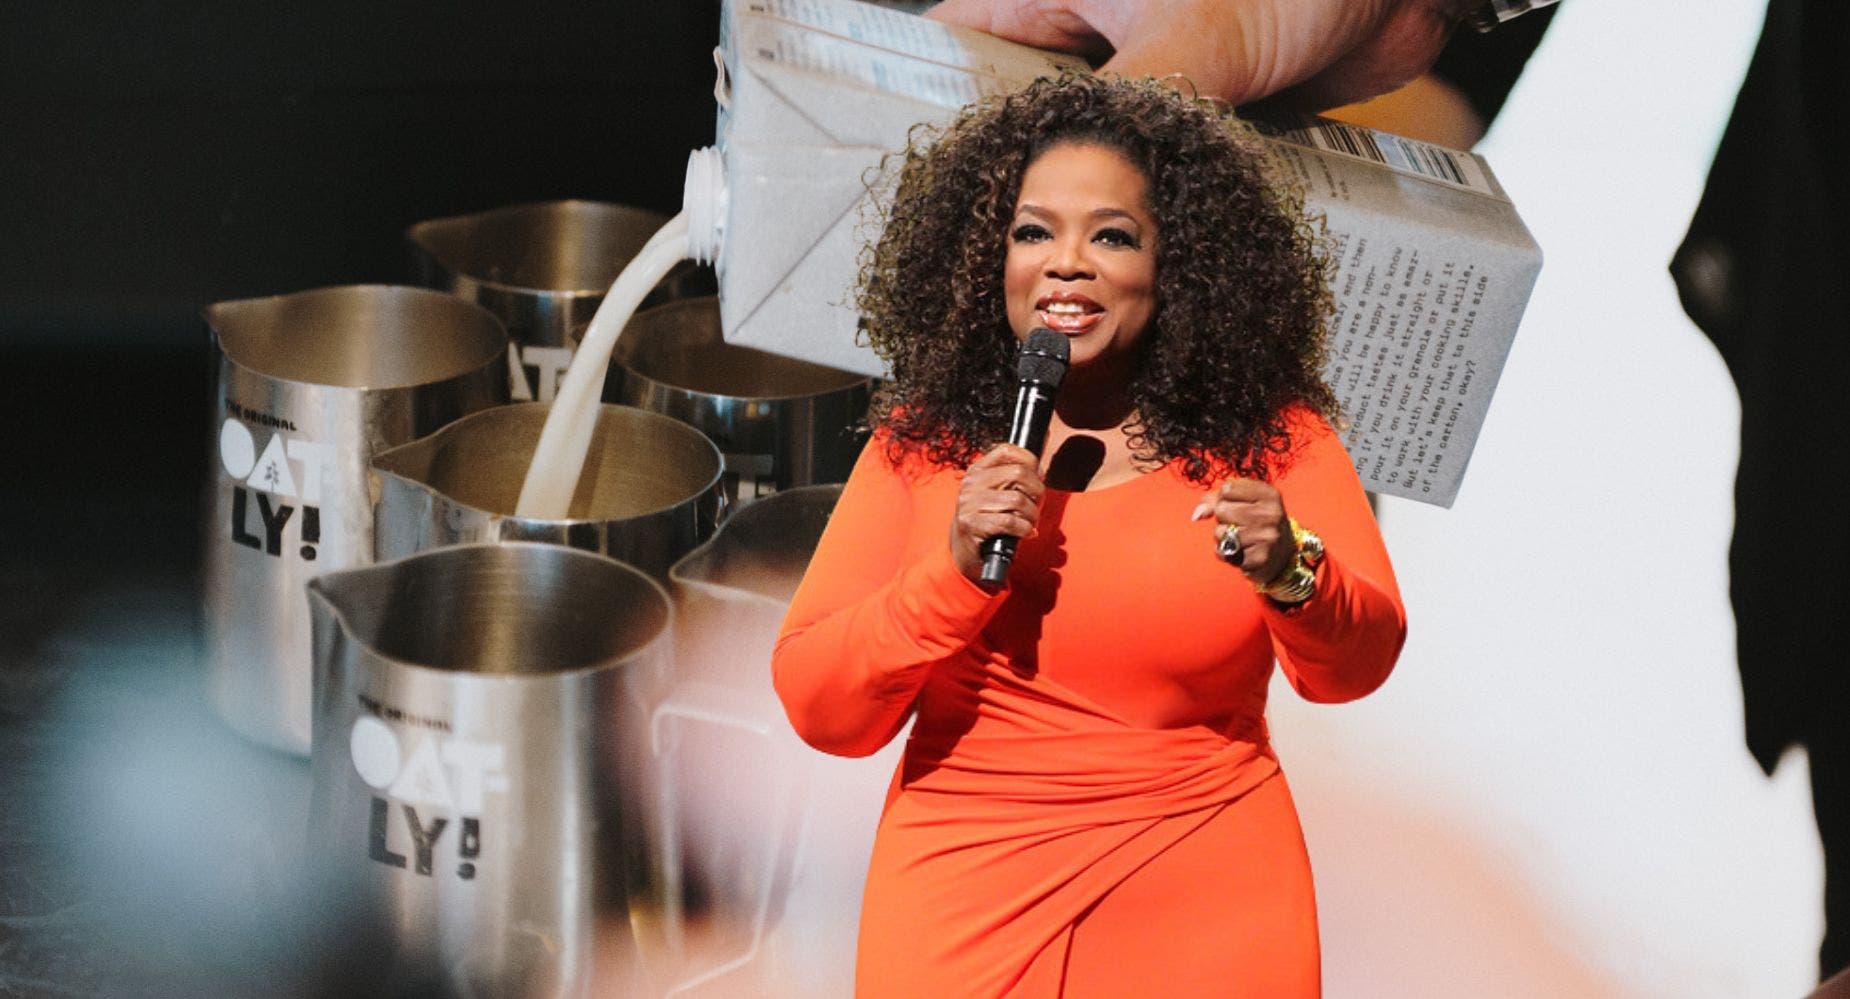 Oprah Winfrey Backed Oatly, But The Short Seller Target Is Losing More Analyst Support